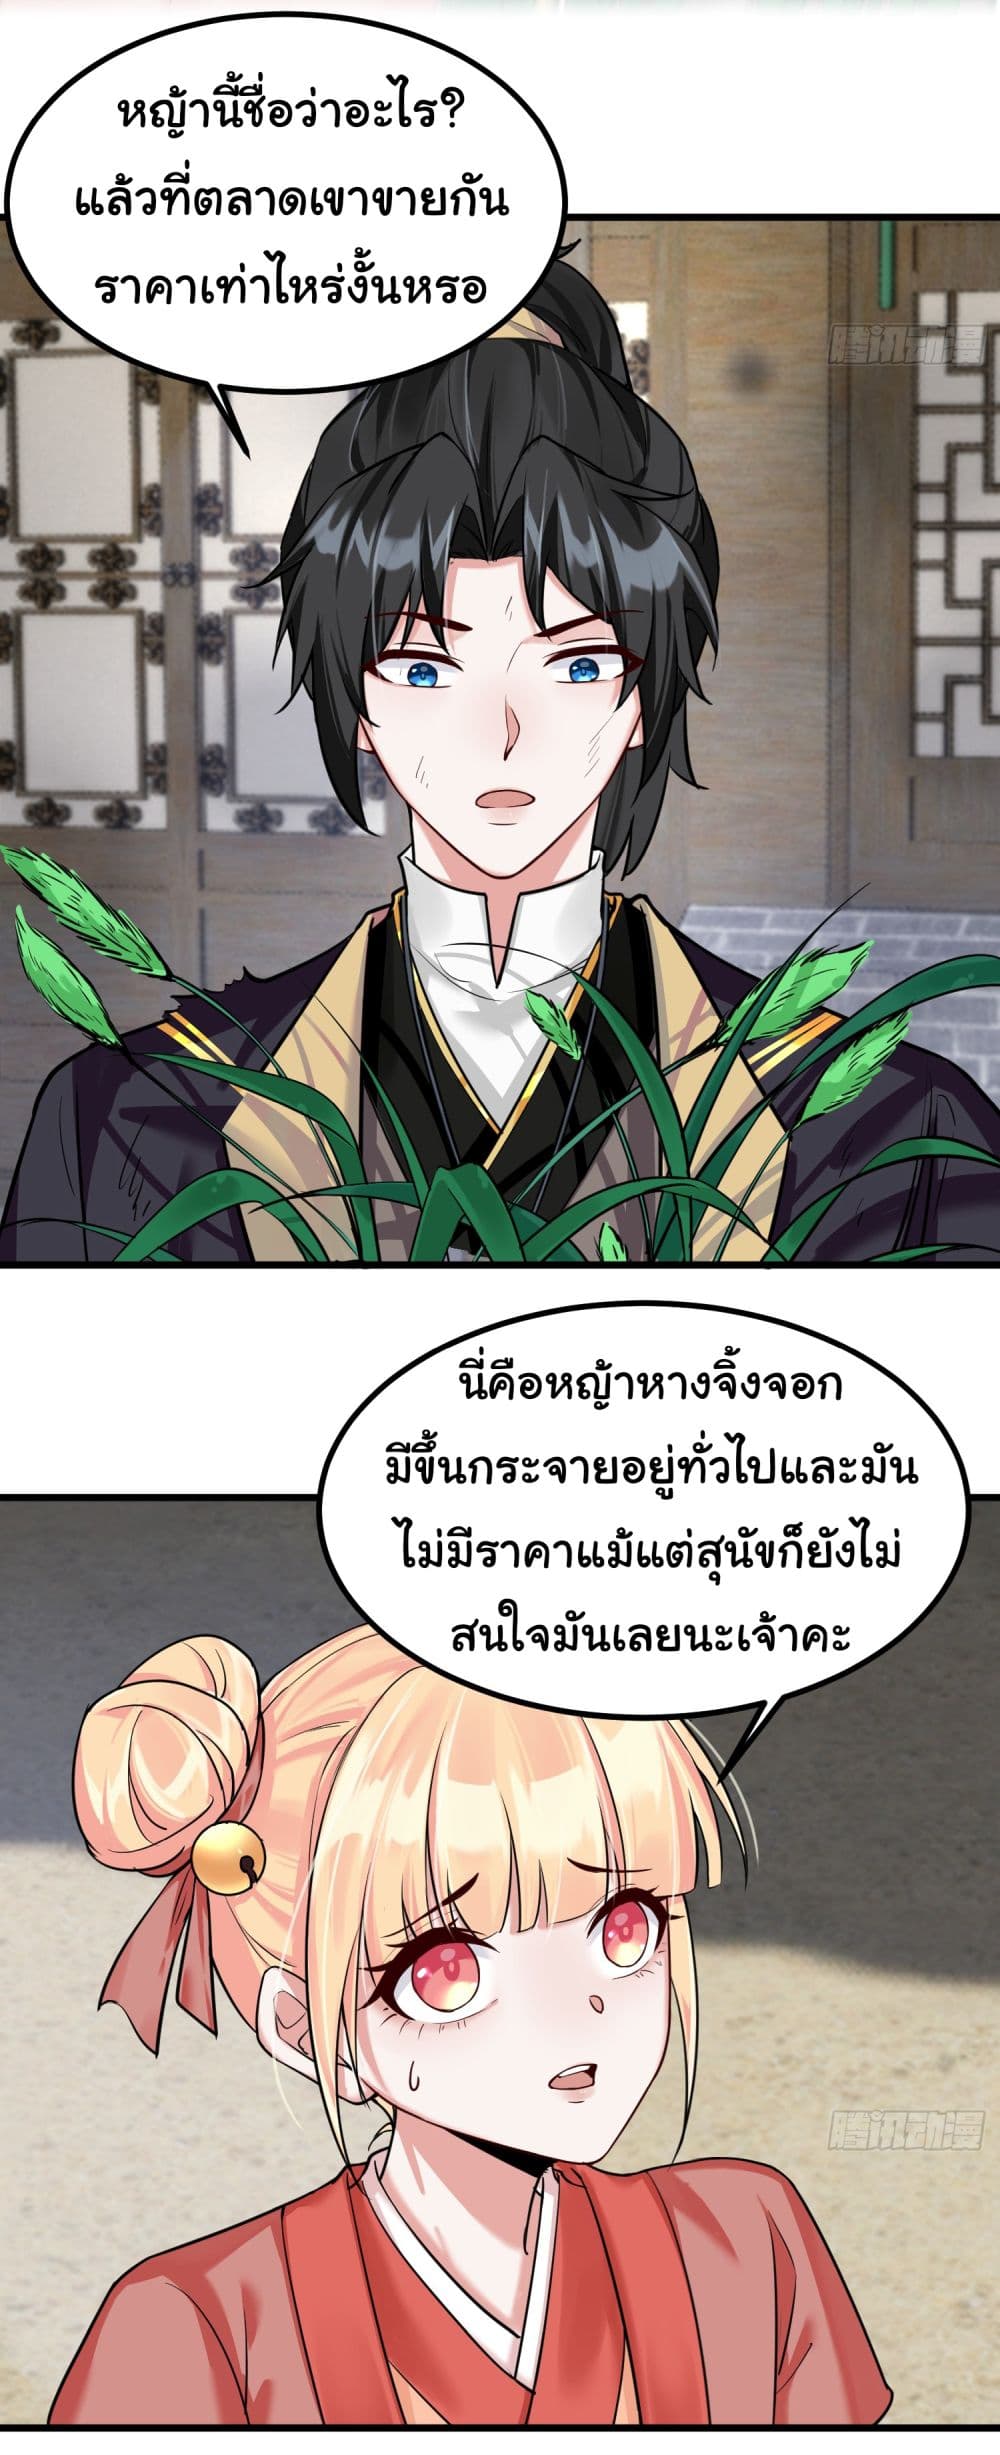 Rebirth of an Immortal Cultivator from 10,000 years ago ตอนที่ 2 (4)